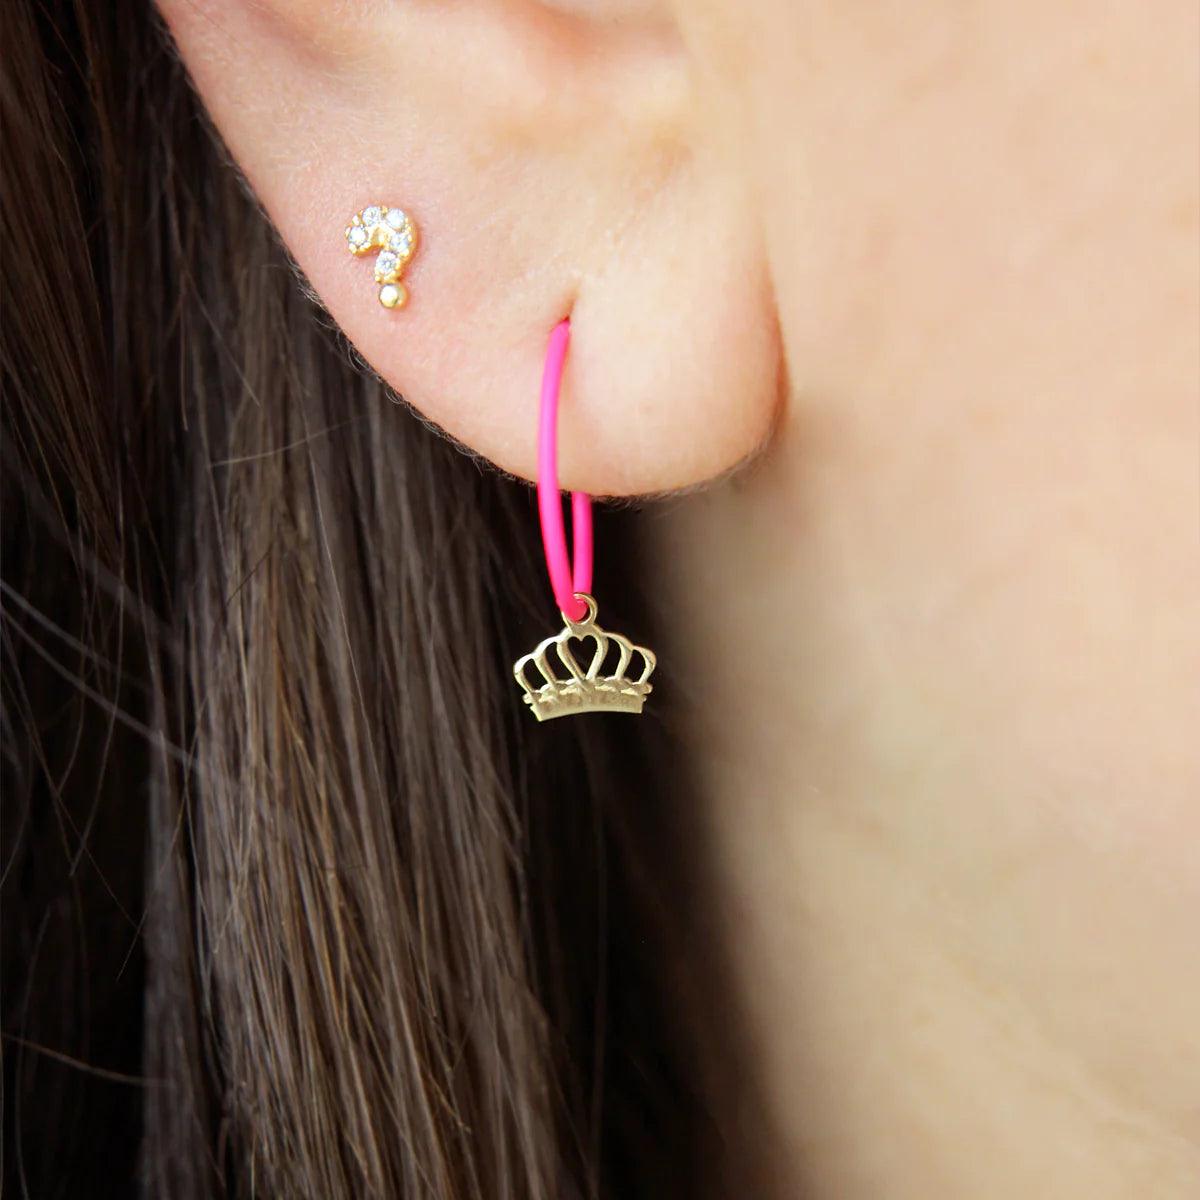 Mono Earring with 18kt gold crown and painted silver hoop - Moregola Fine Jewelry